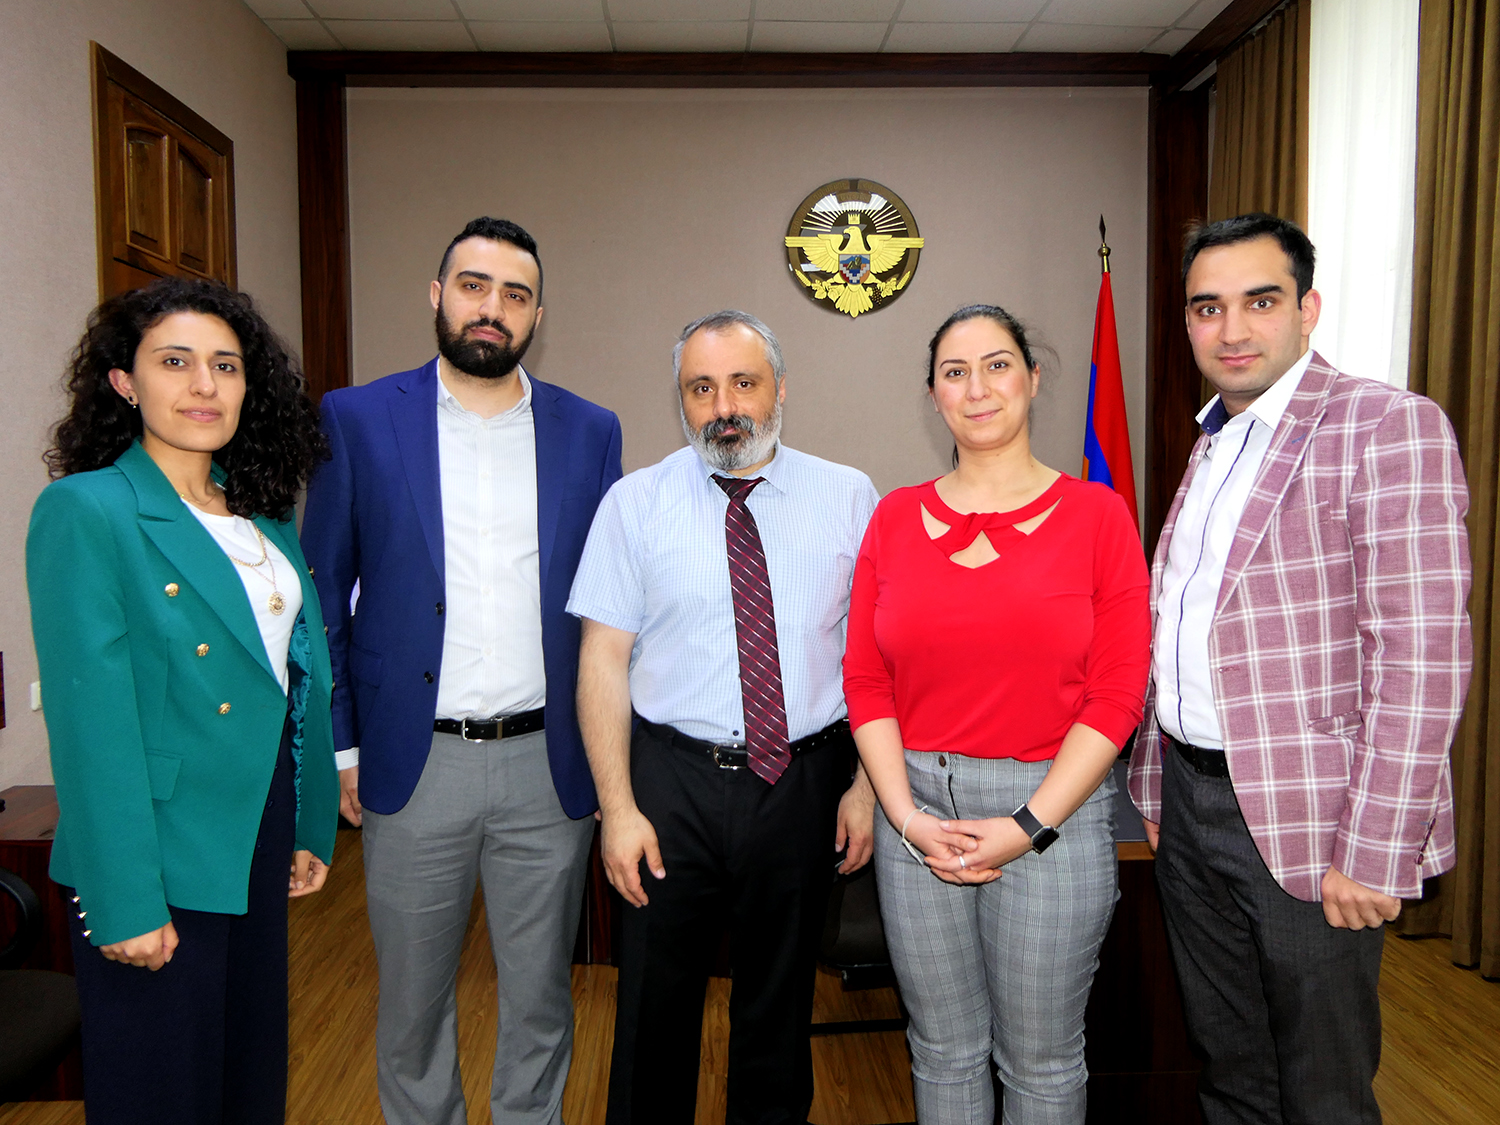 Yerimyan: ‘Artsakh Security and Sovereignty are ANCA’s Top Advocacy Priorities’